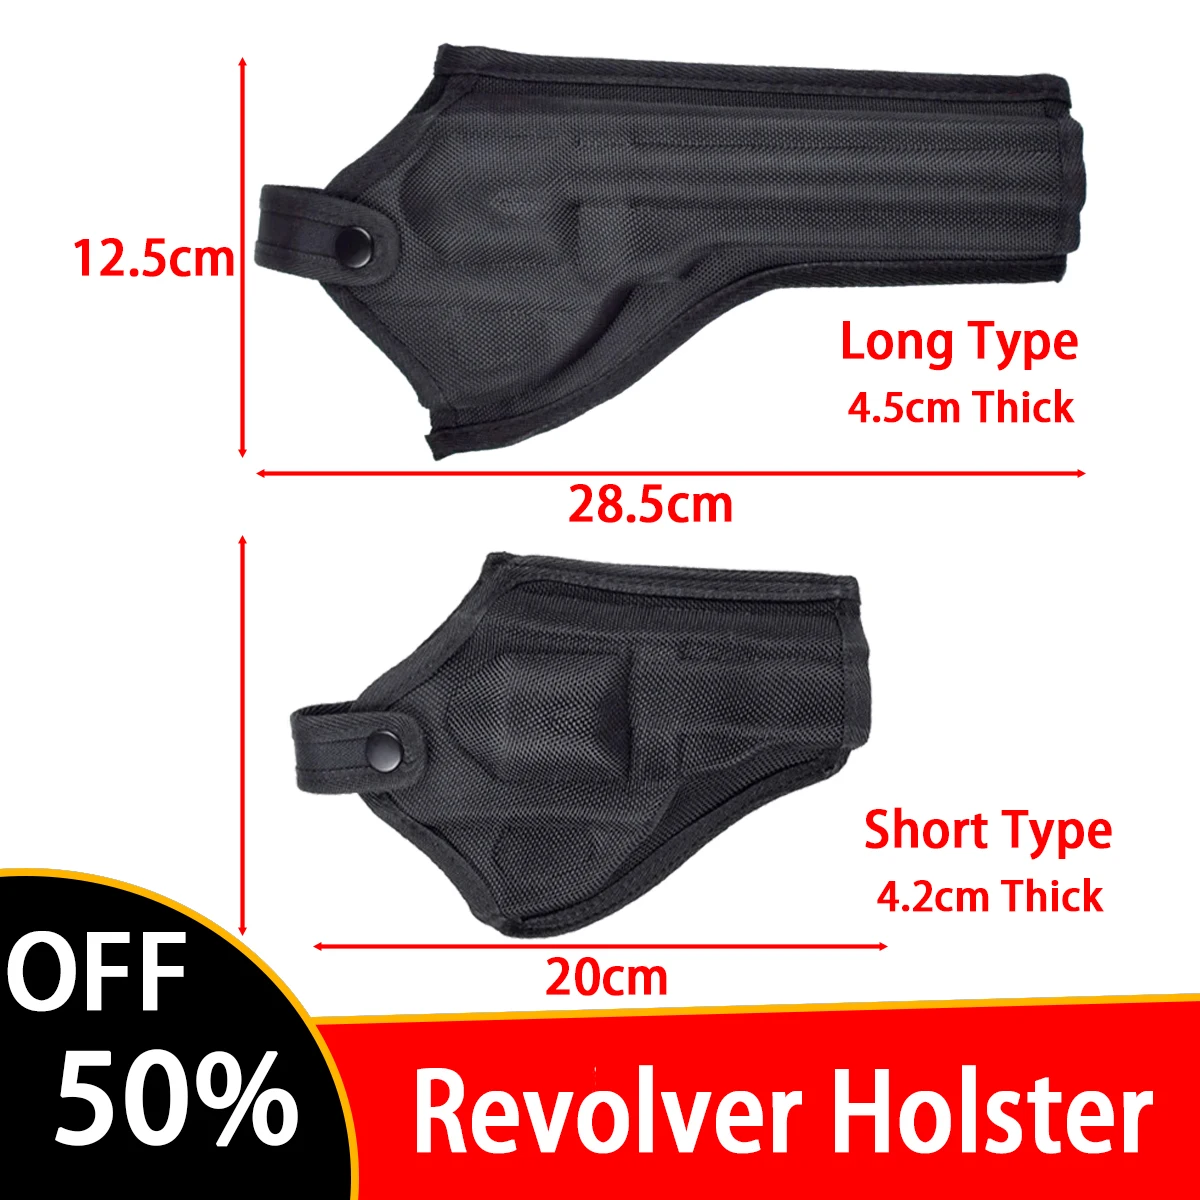 

Tactical Revolver Holster Airsoft Gun Case Universal Oxford Revolver Duty Holster Hunting Pistol Case Carry For Revolver Sleeve